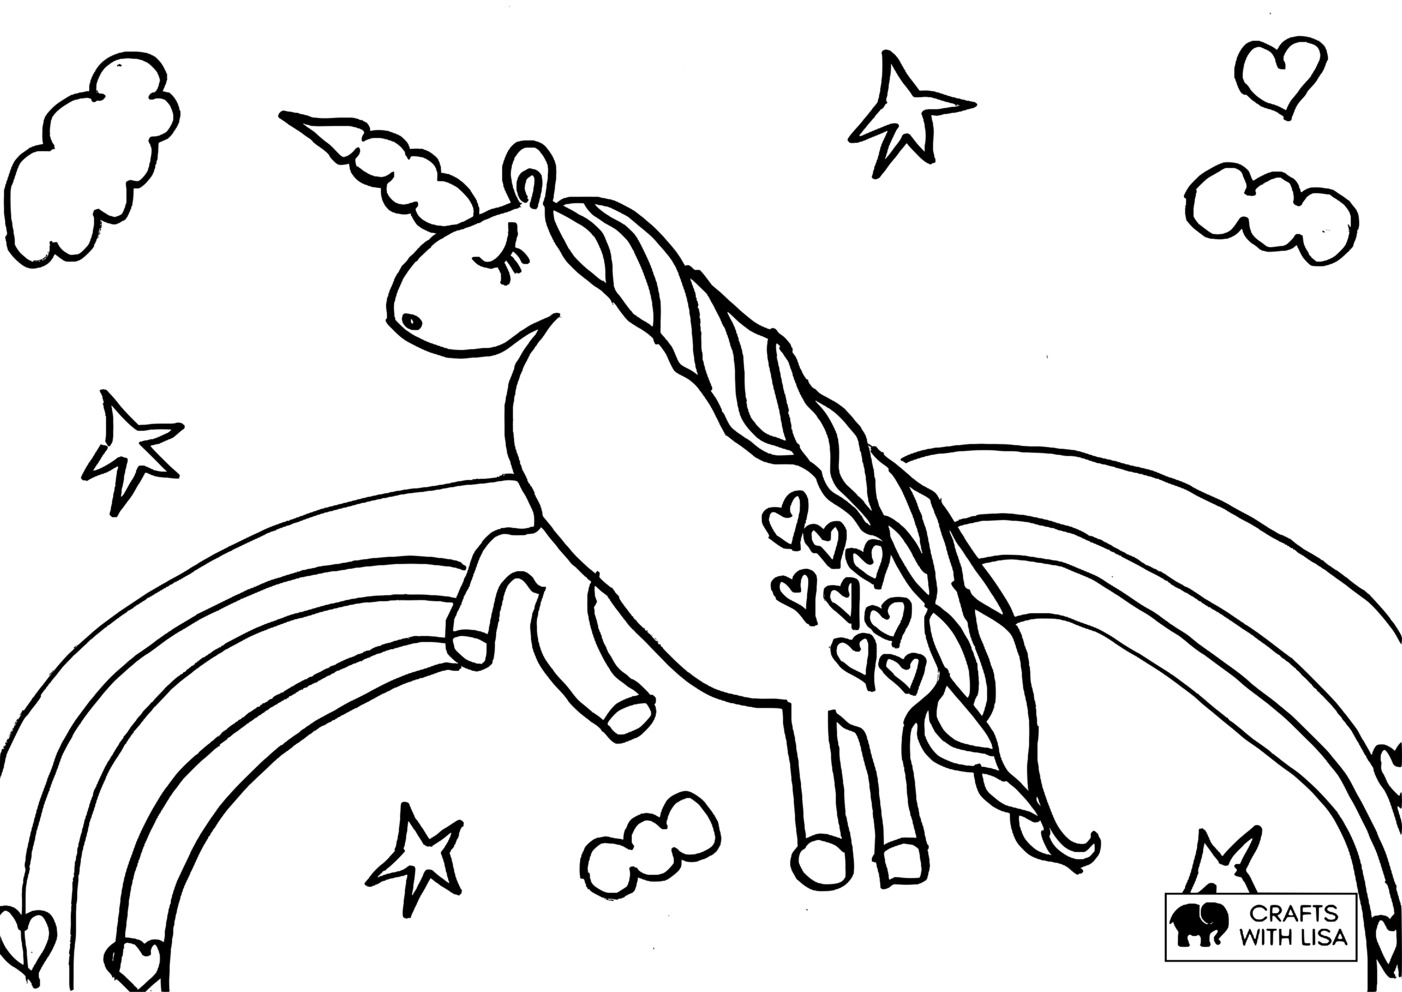 rainbow black and white coloring page